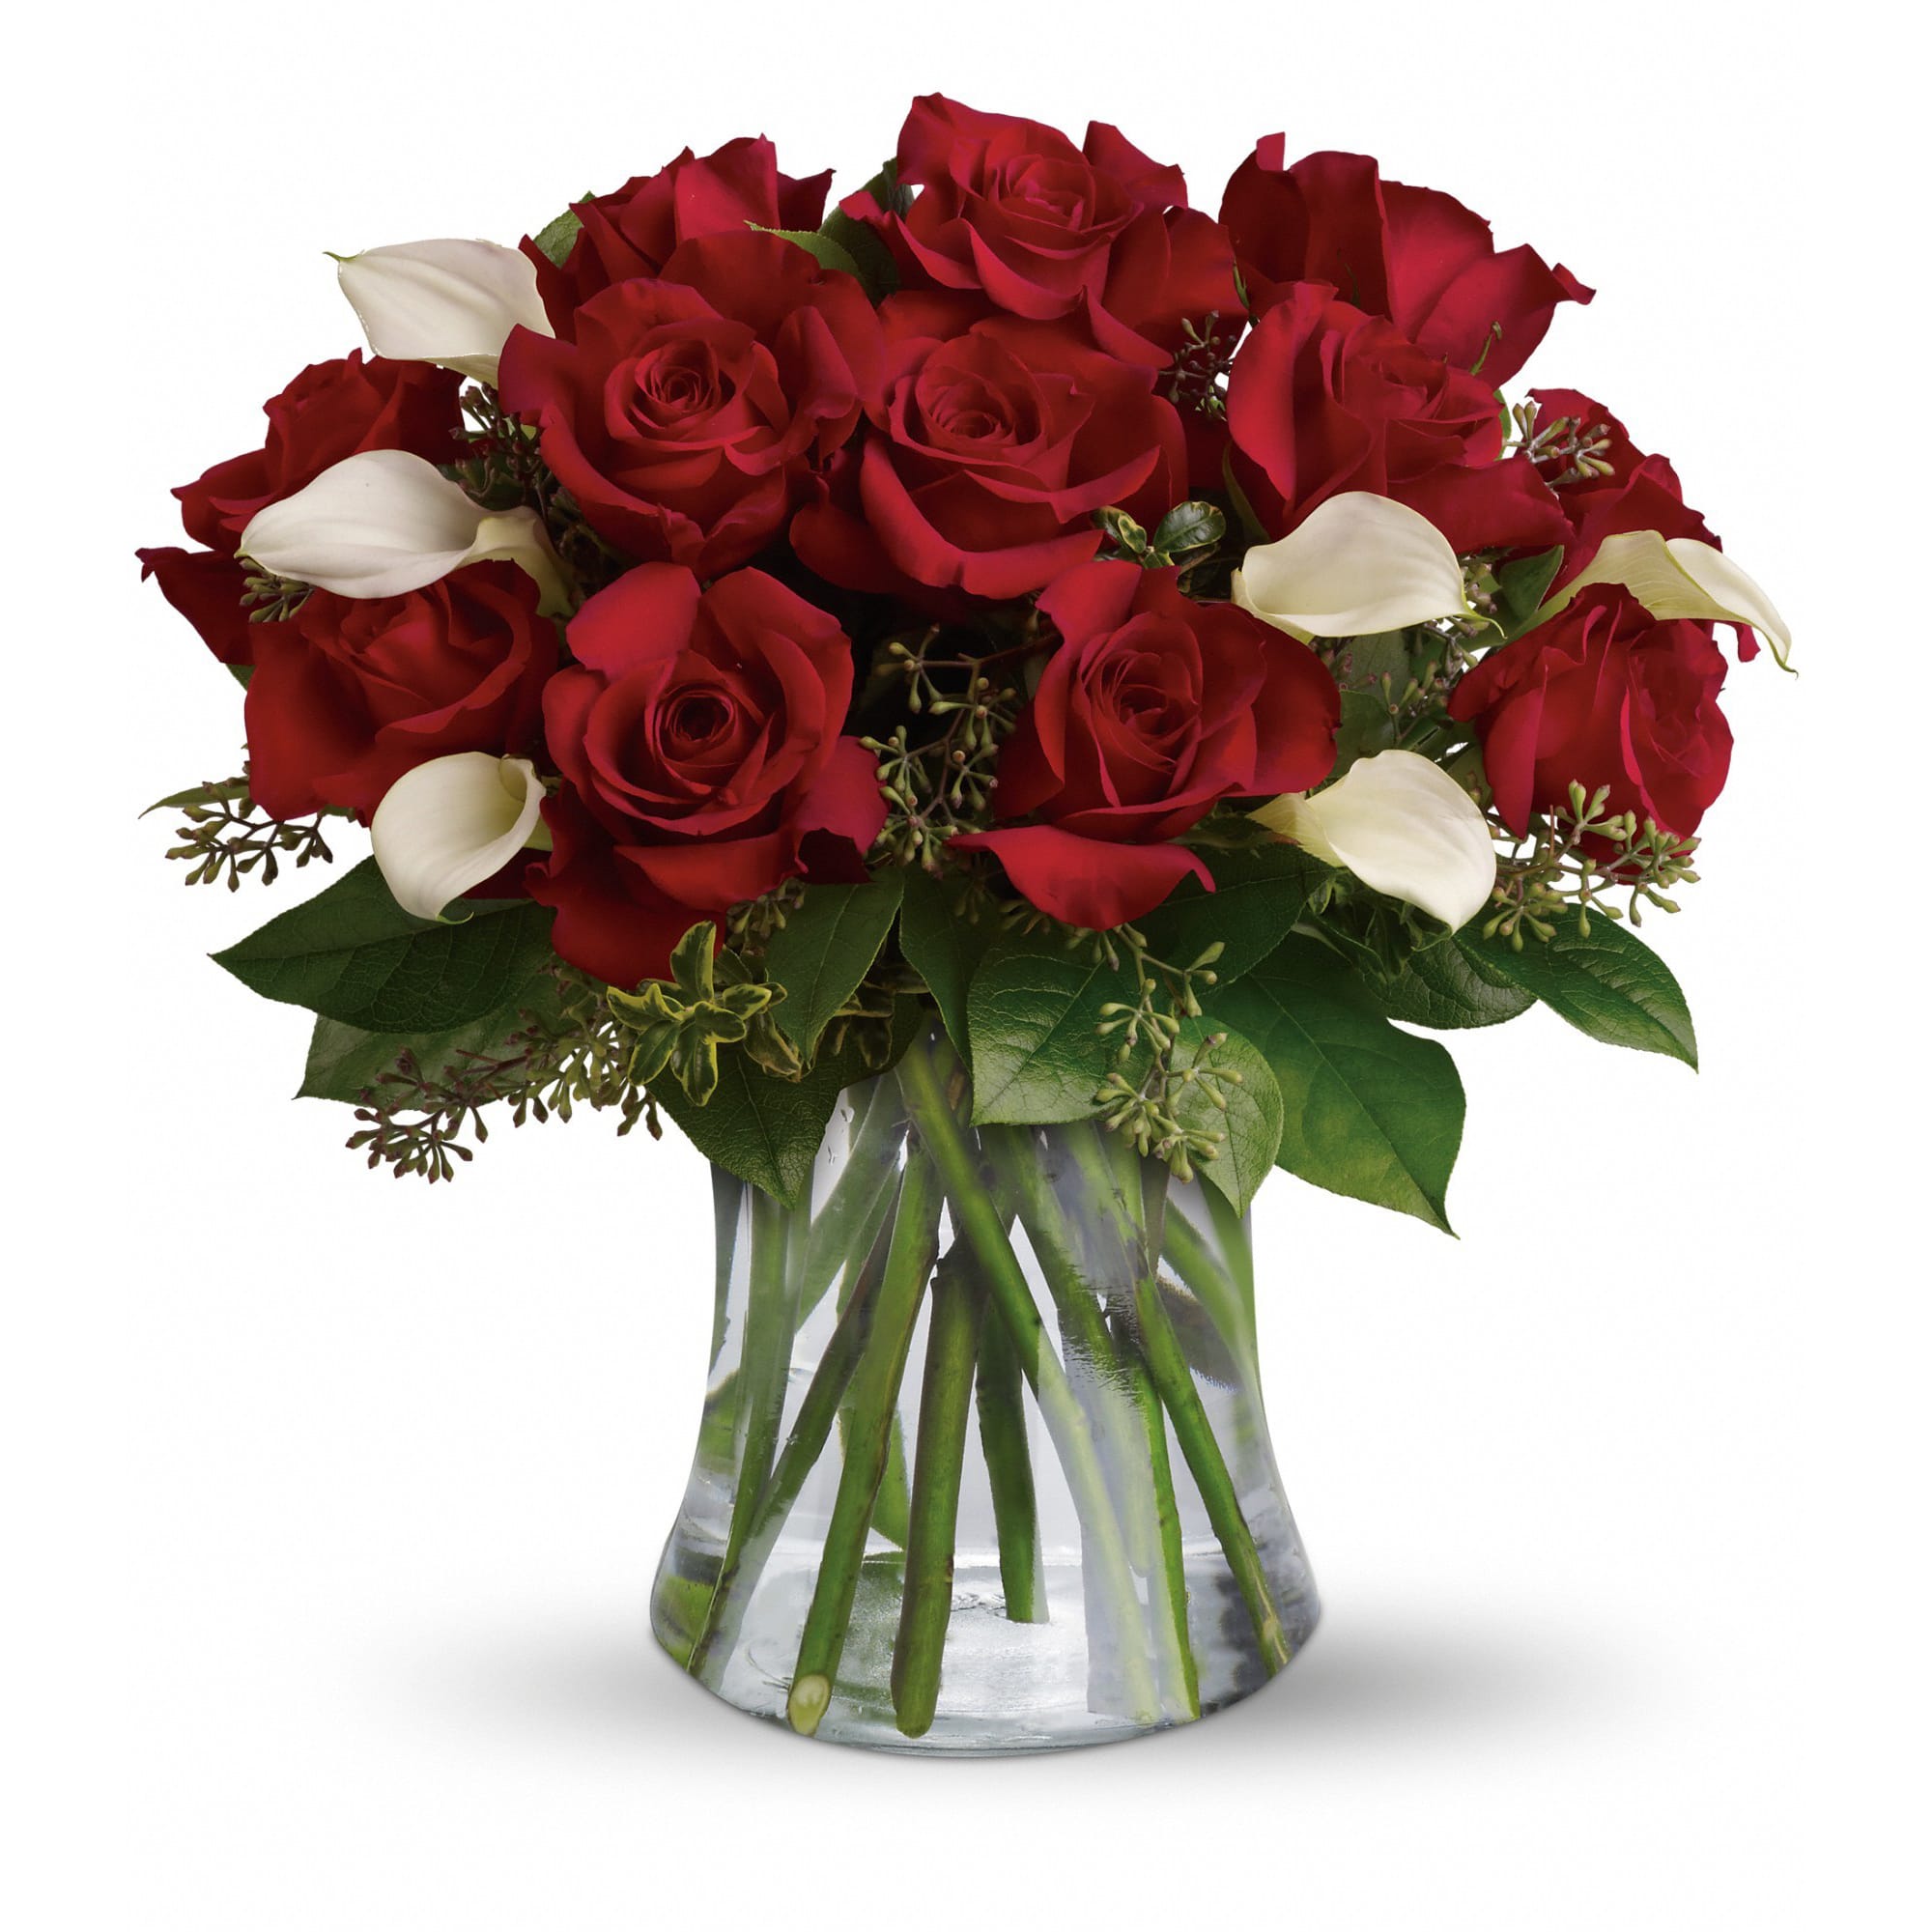 Be Still My Heart - The look of love is charmingly reflected in this romantic array of red roses and white callas, pave style. Beautifully presented in a sparkling glass vase, these gorgeous flowers will say what's in your heart more eloquently than words.  *** PRICING IS SUBJECT TO CHANGE FROM FEB. 1 - 15 ***